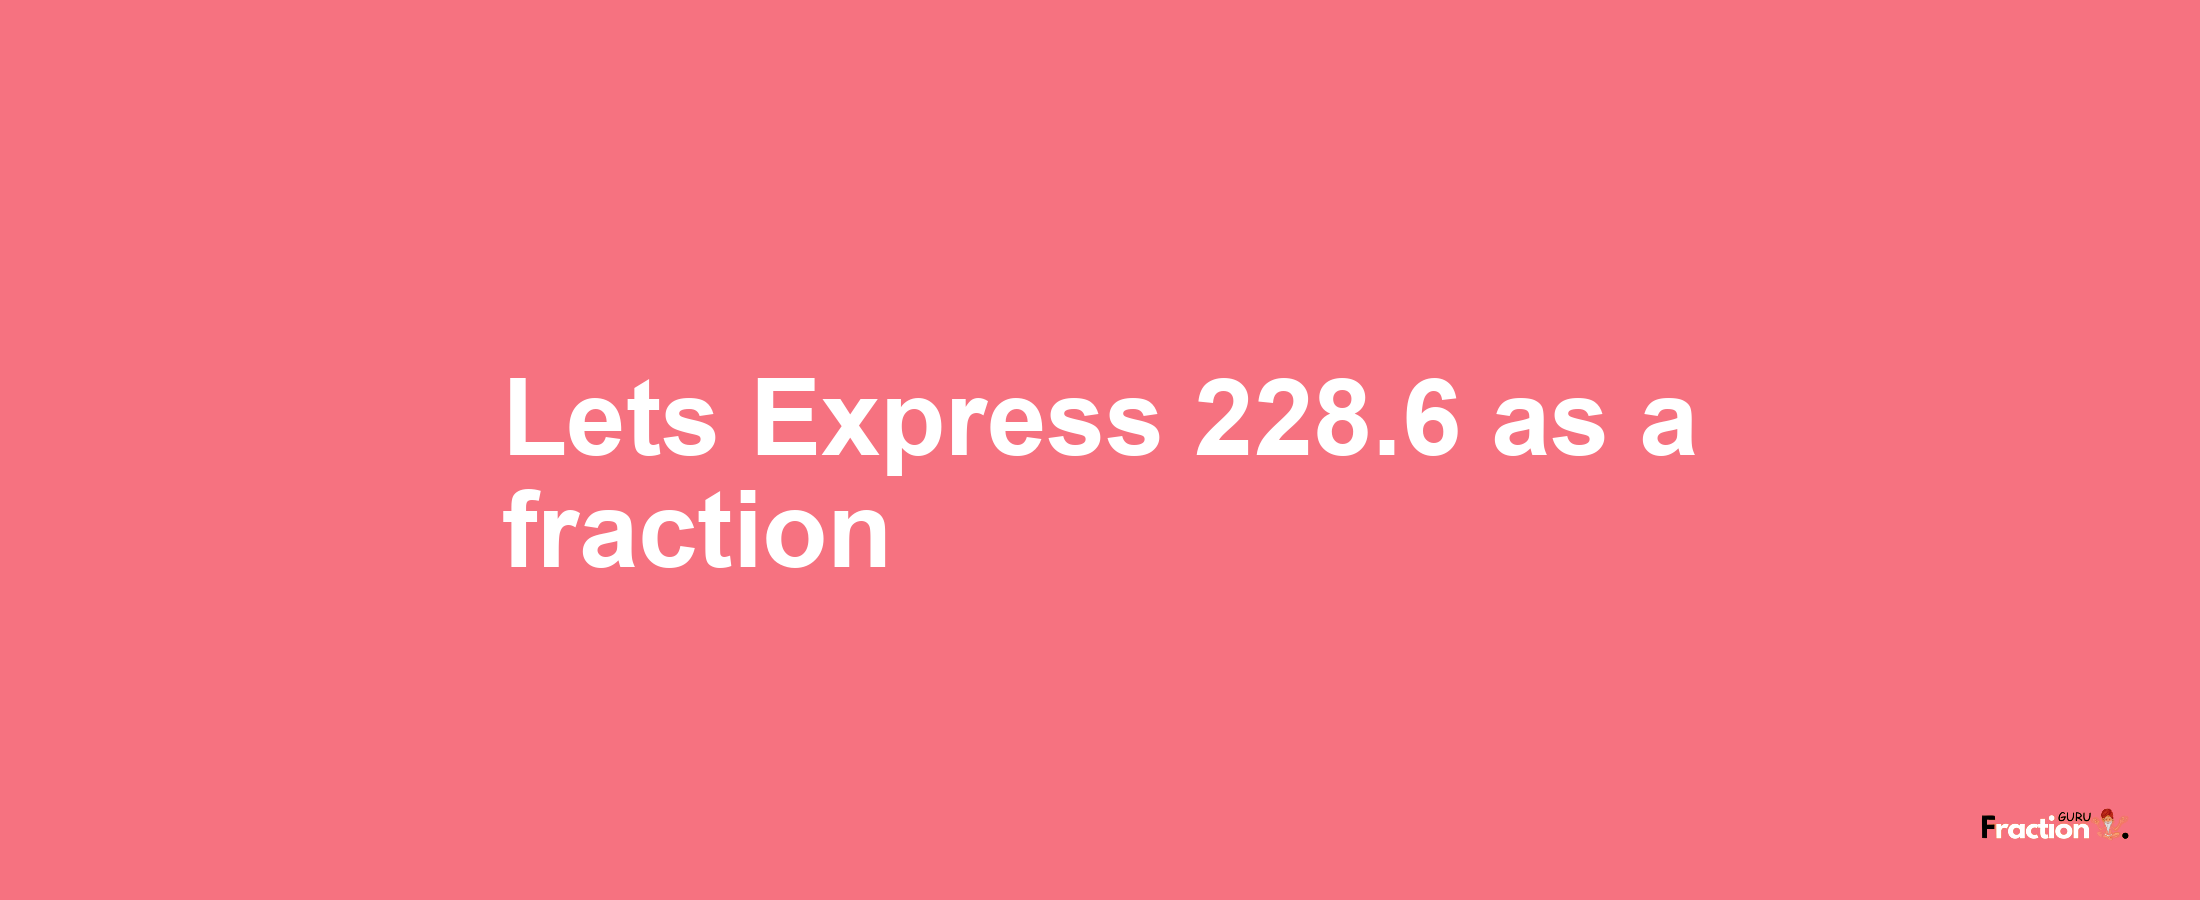 Lets Express 228.6 as afraction